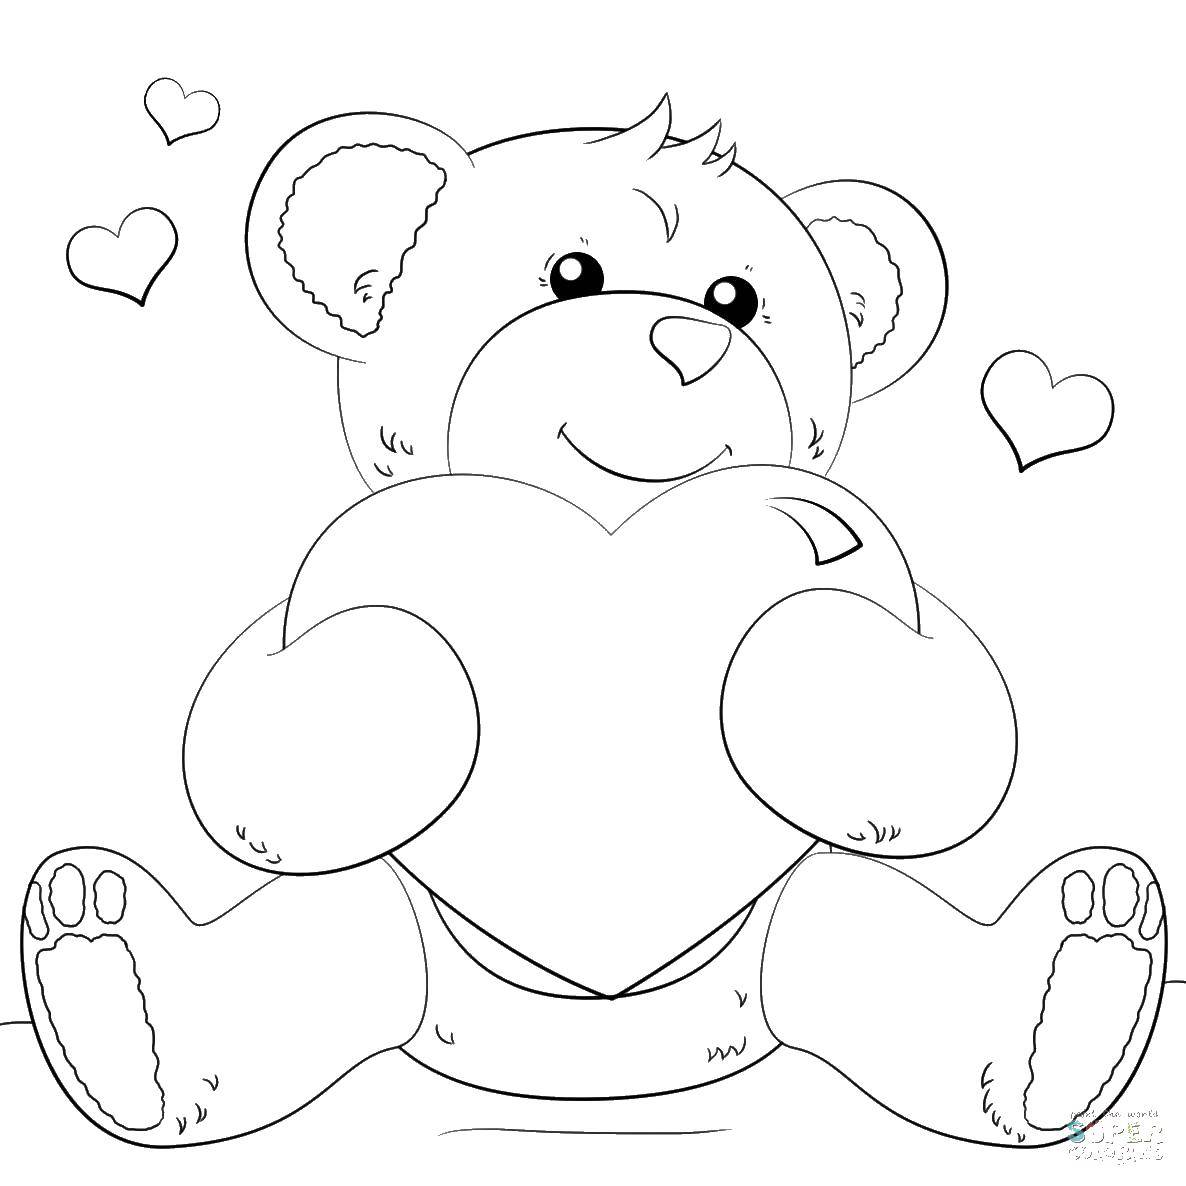 Coloring The hearts and Teddy bear. Category coloring. Tags:  hearts, bear.